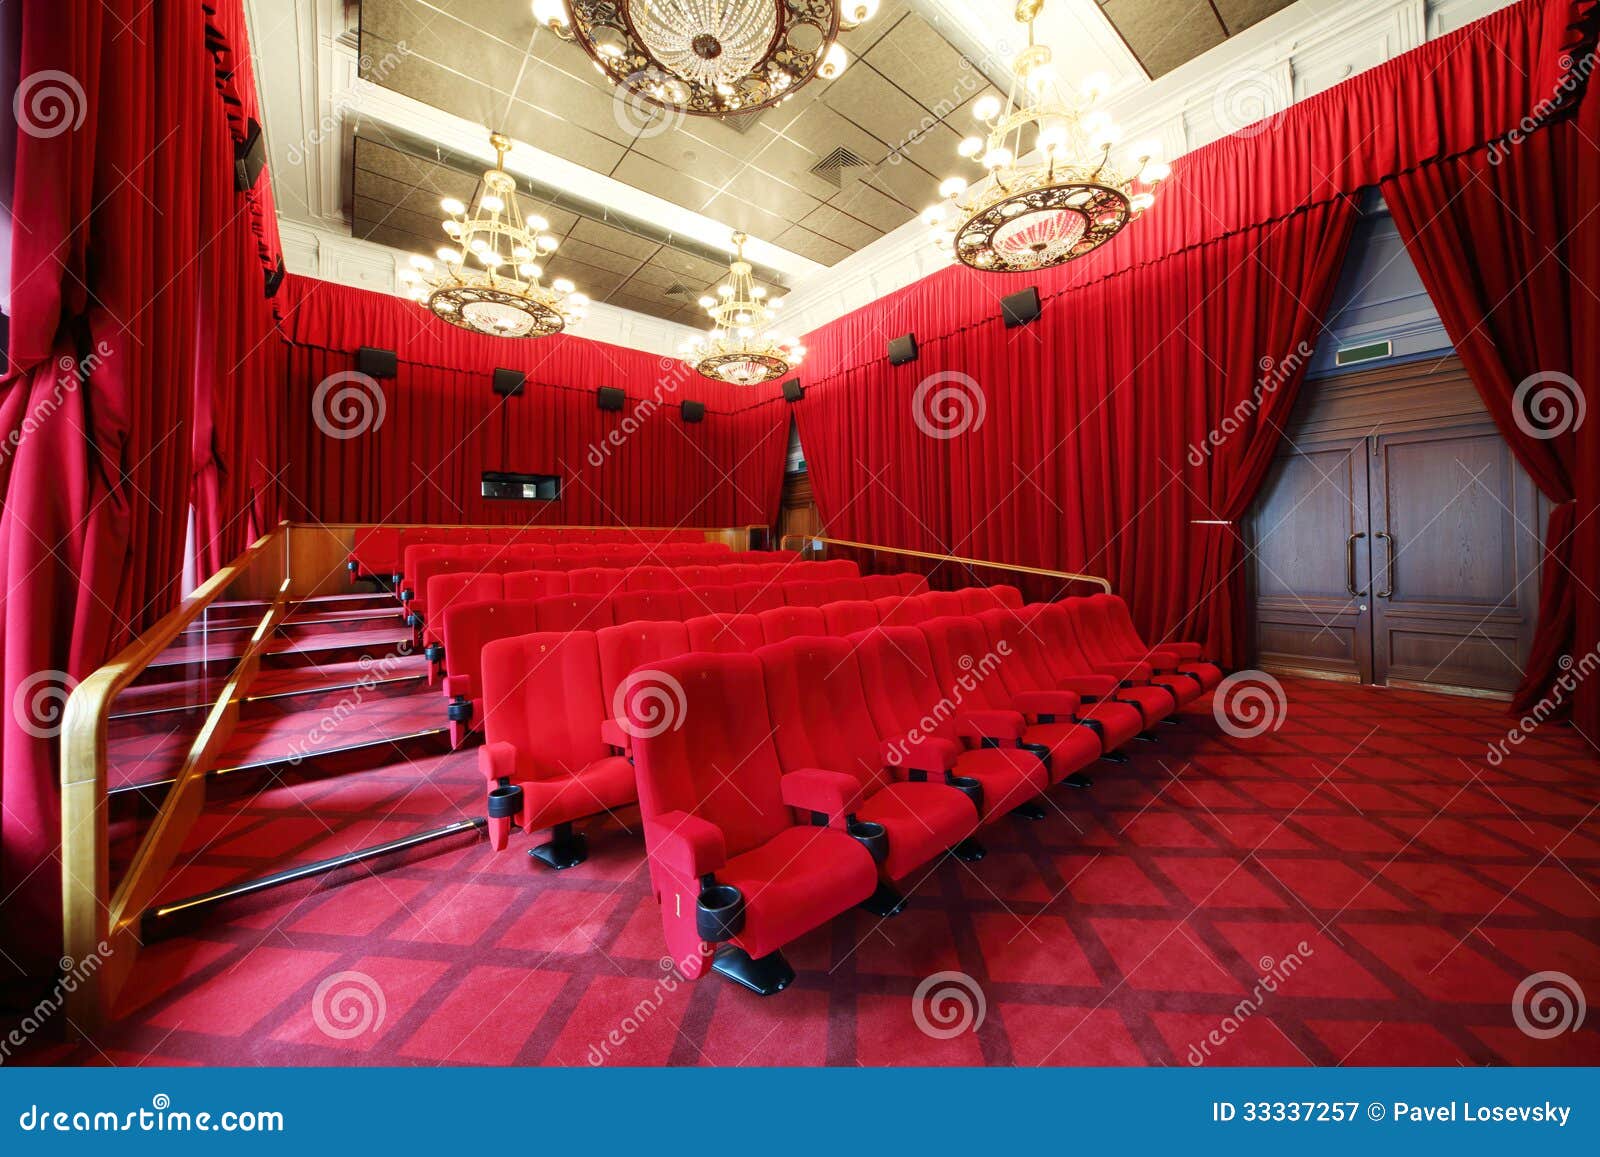 film theatre with chandeliers and rows of seats